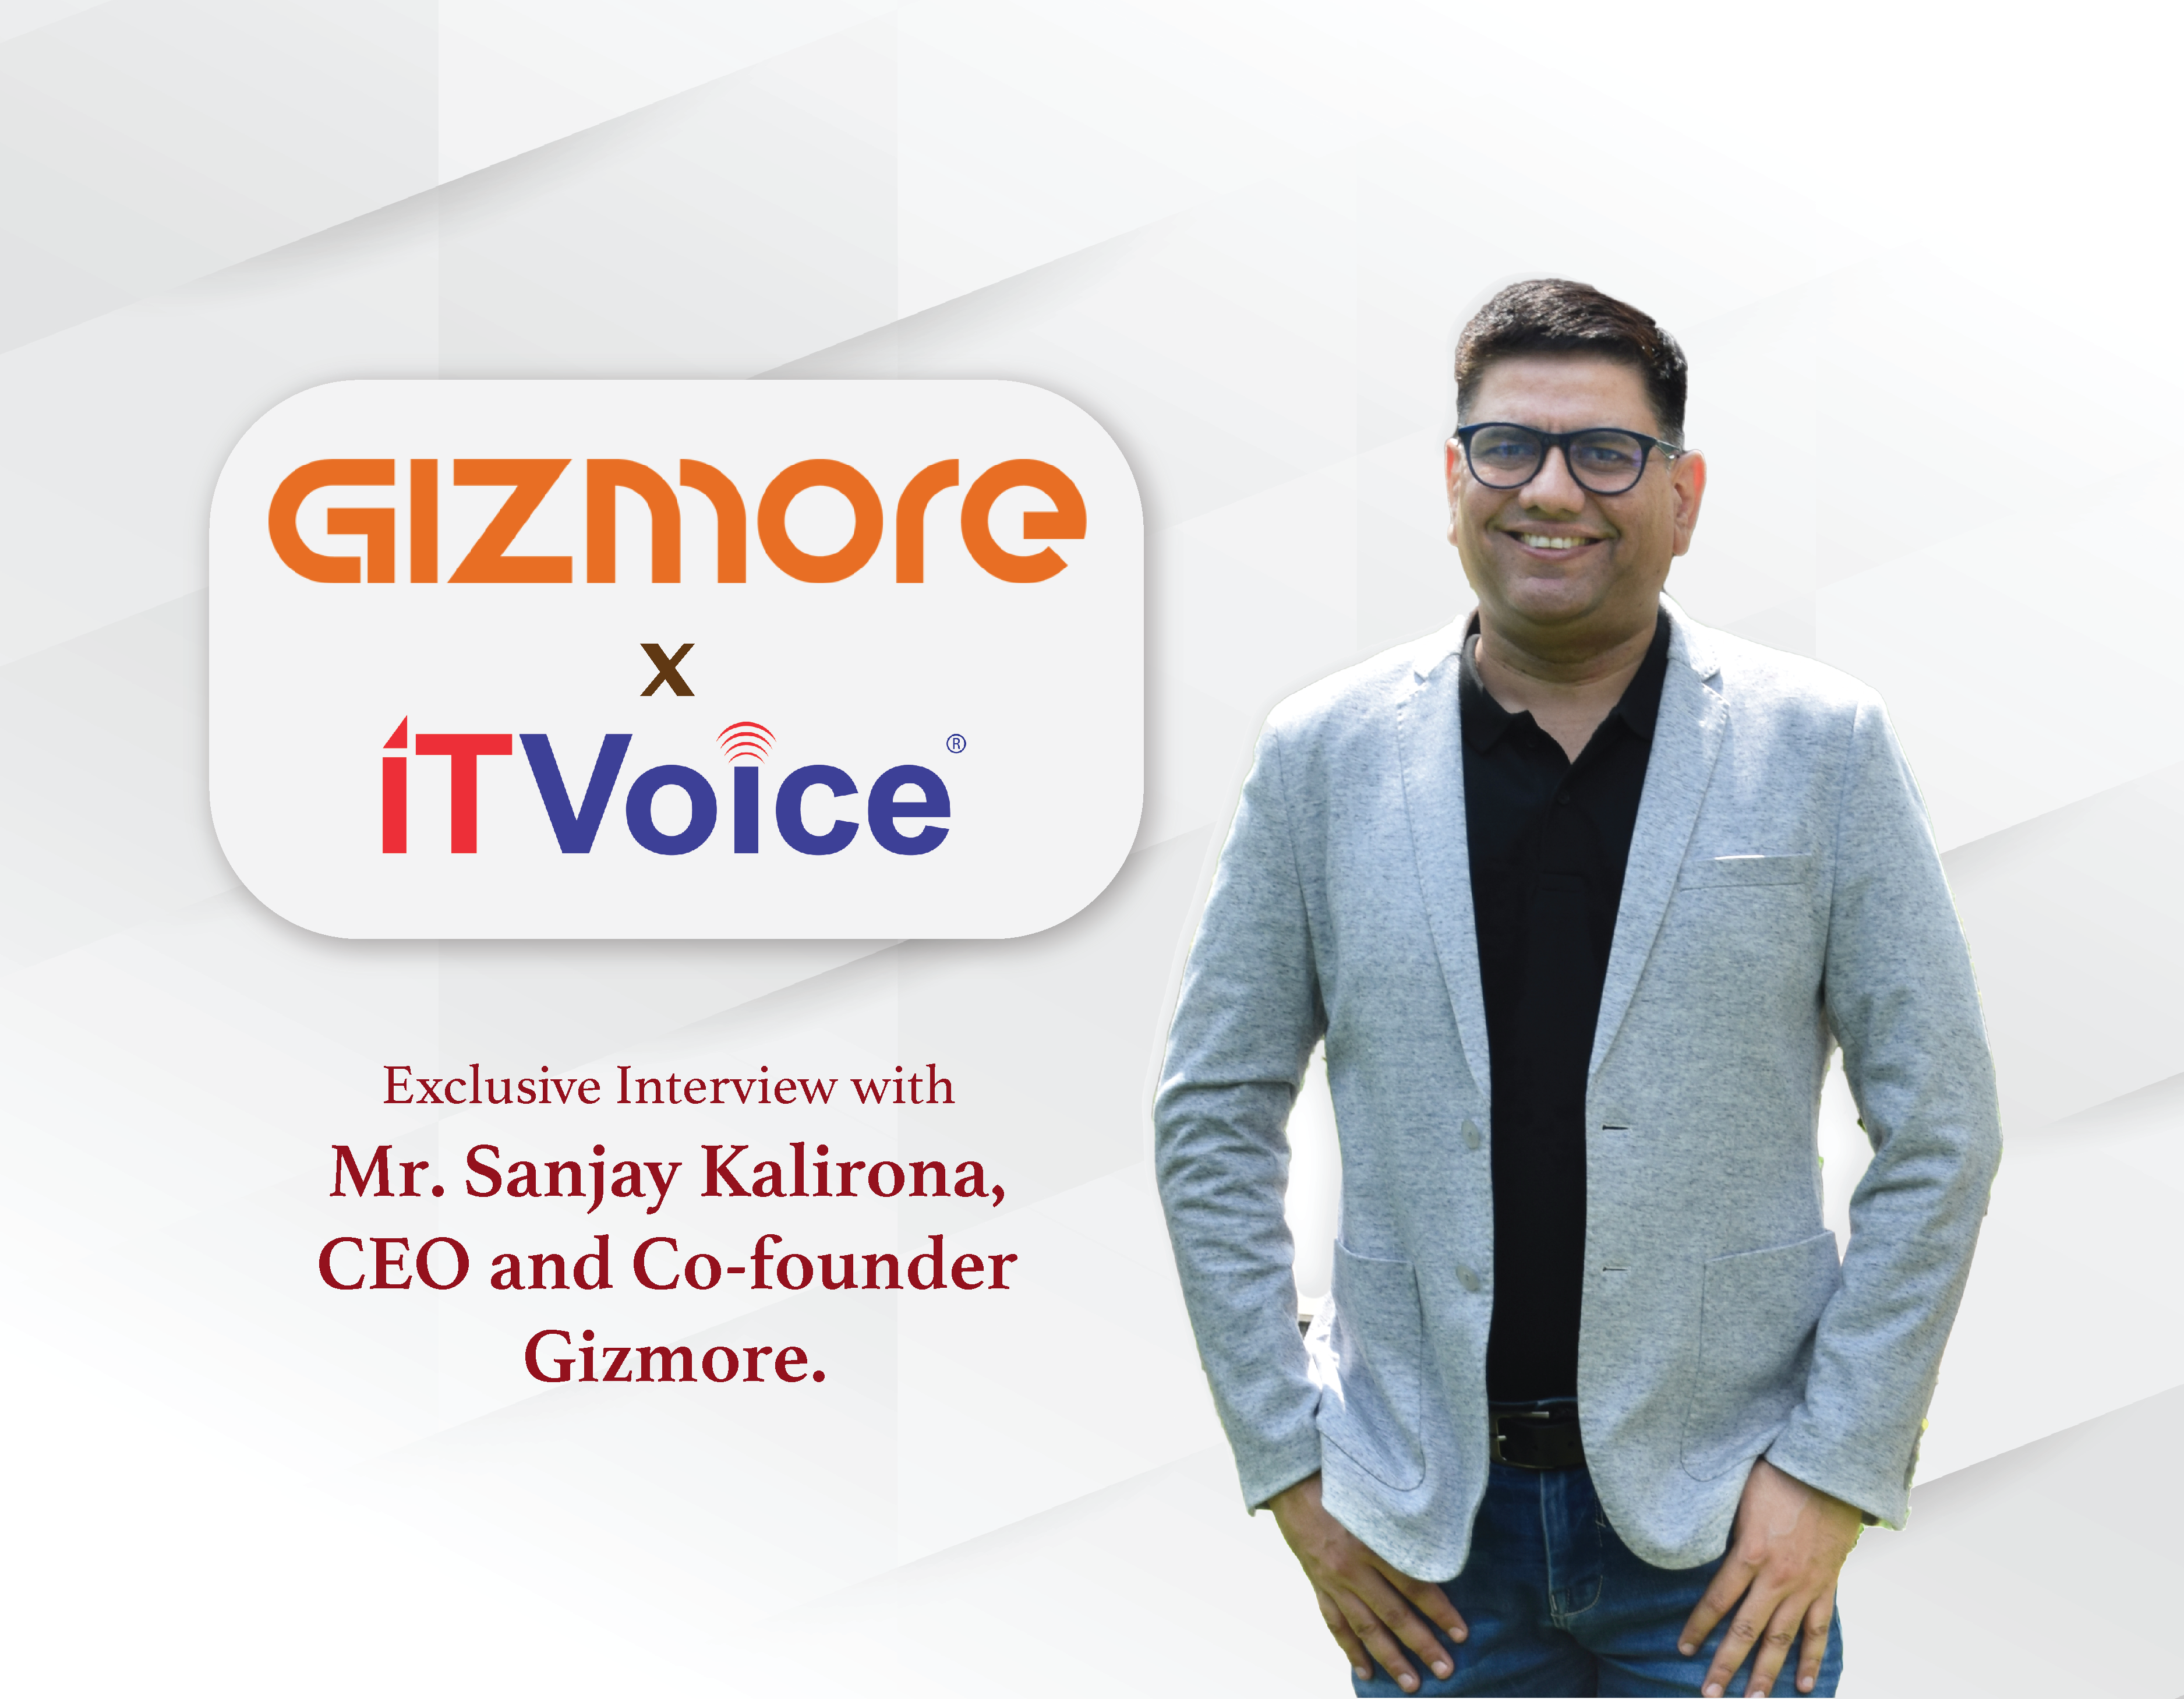 Exclusive Interview with Mr. Sanjay Kalirona, CEO and Co-founder Gizmore.